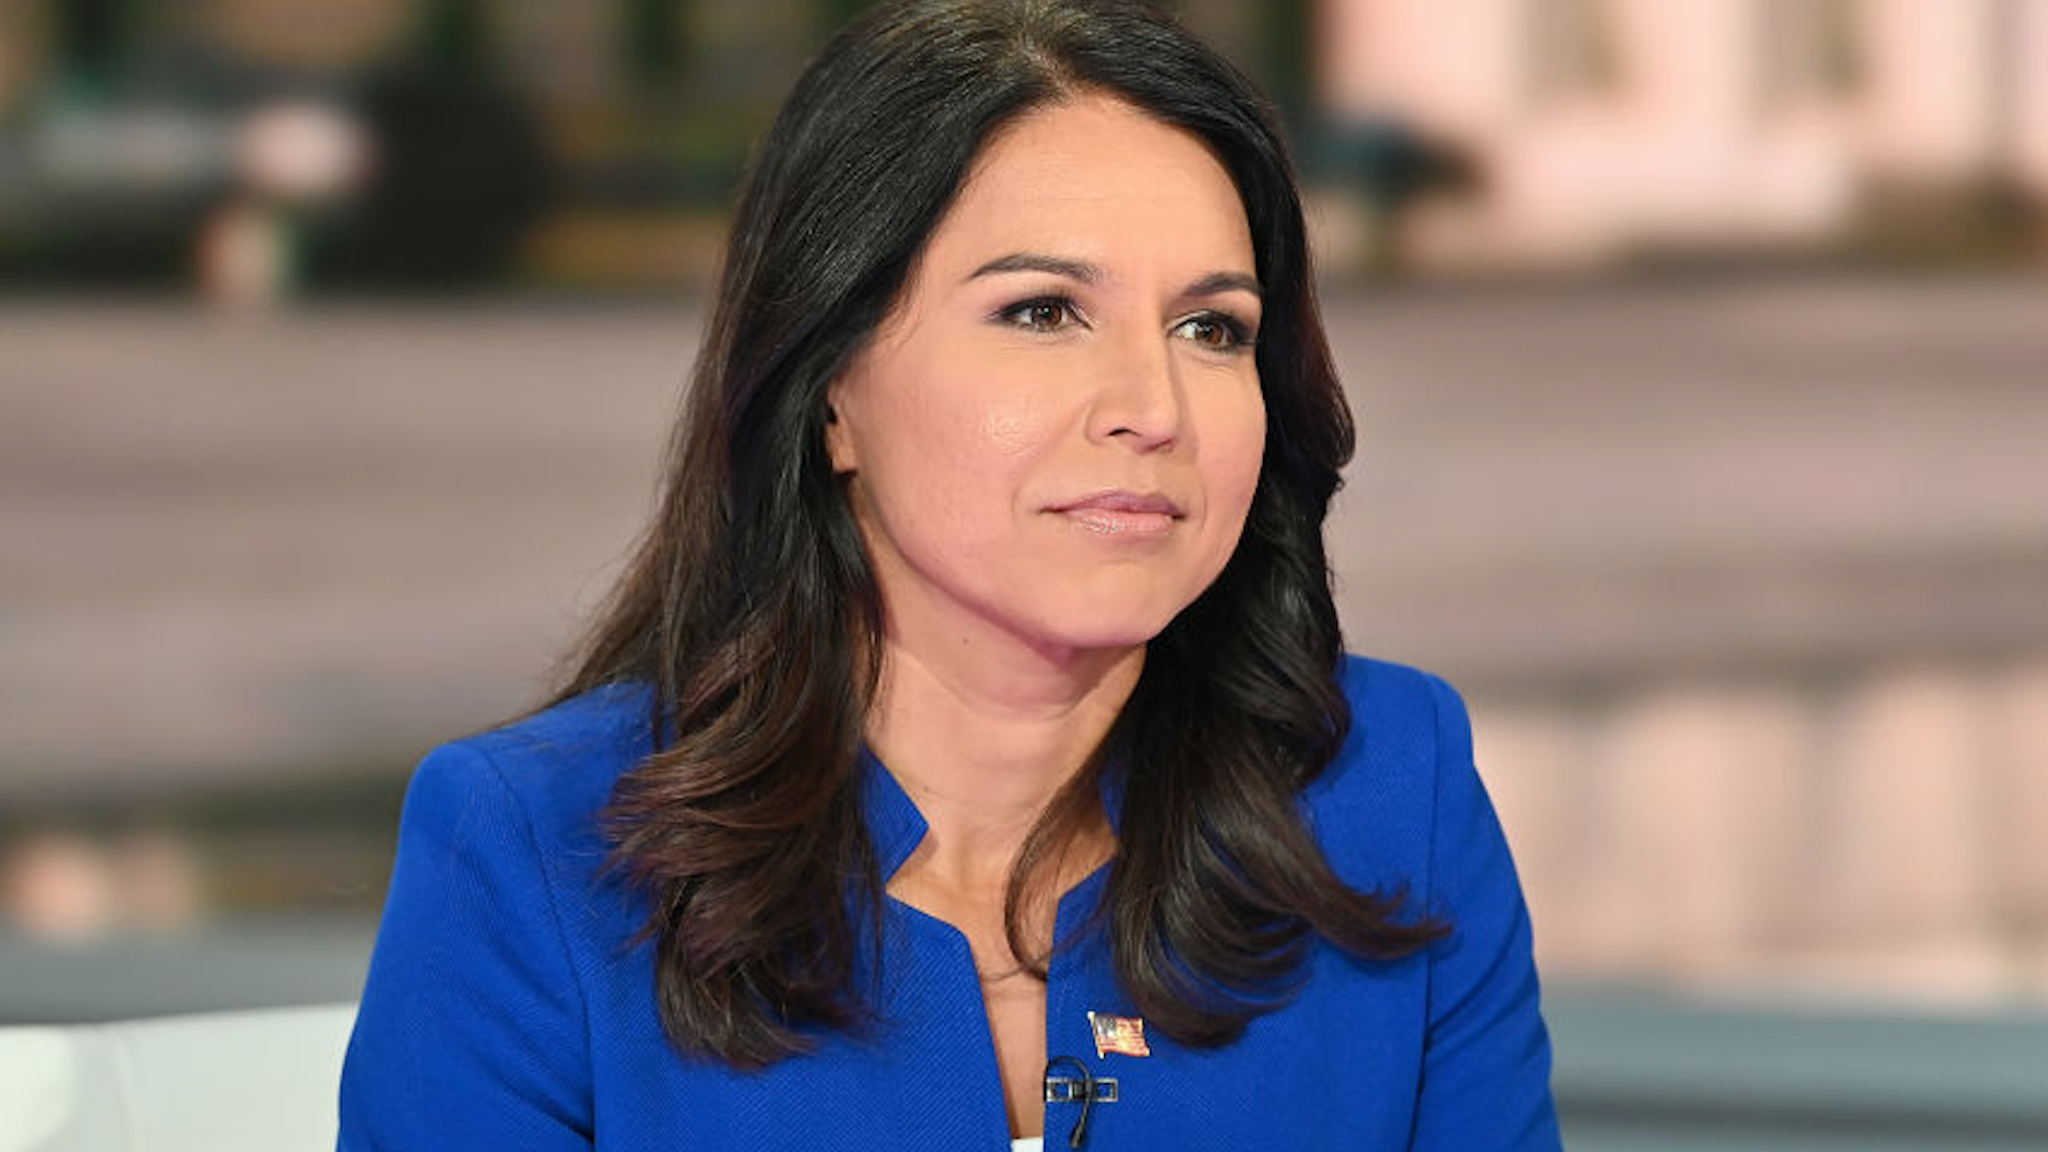 Democratic Presidential Candidate Tulsi Gabbard visits "FOX & Friends" at Fox News Channel Studios on September 24, 2019 in New York City.